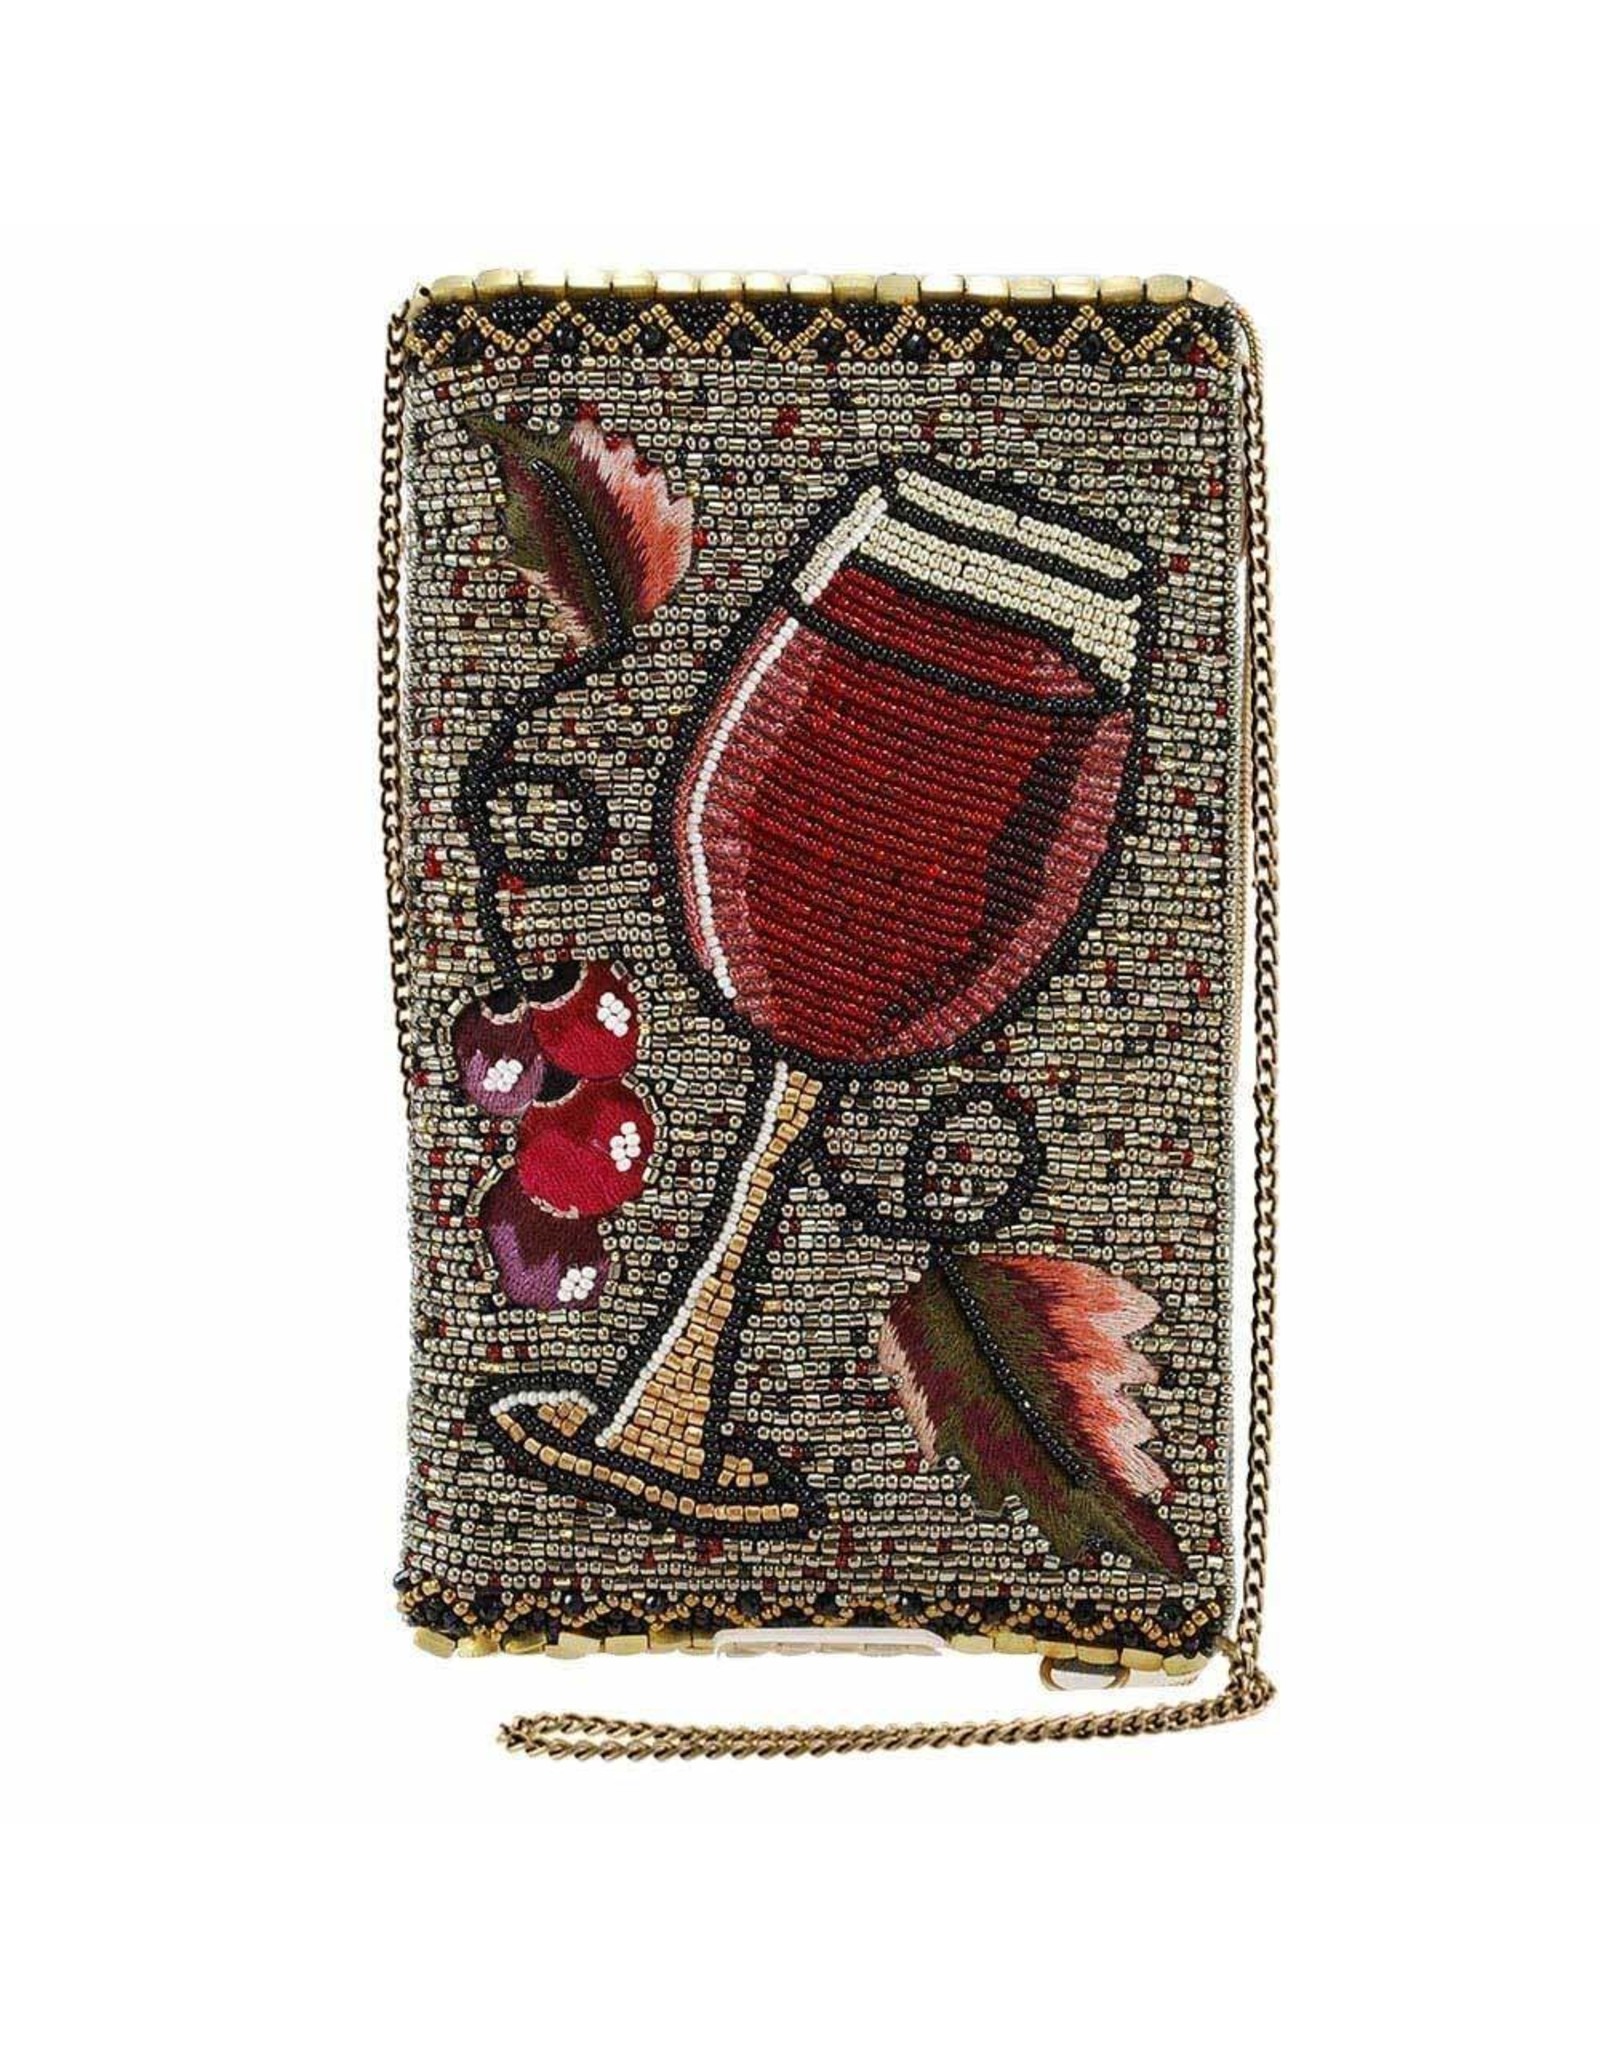 MARY FRANCES VINO CELL PHONE POUCH